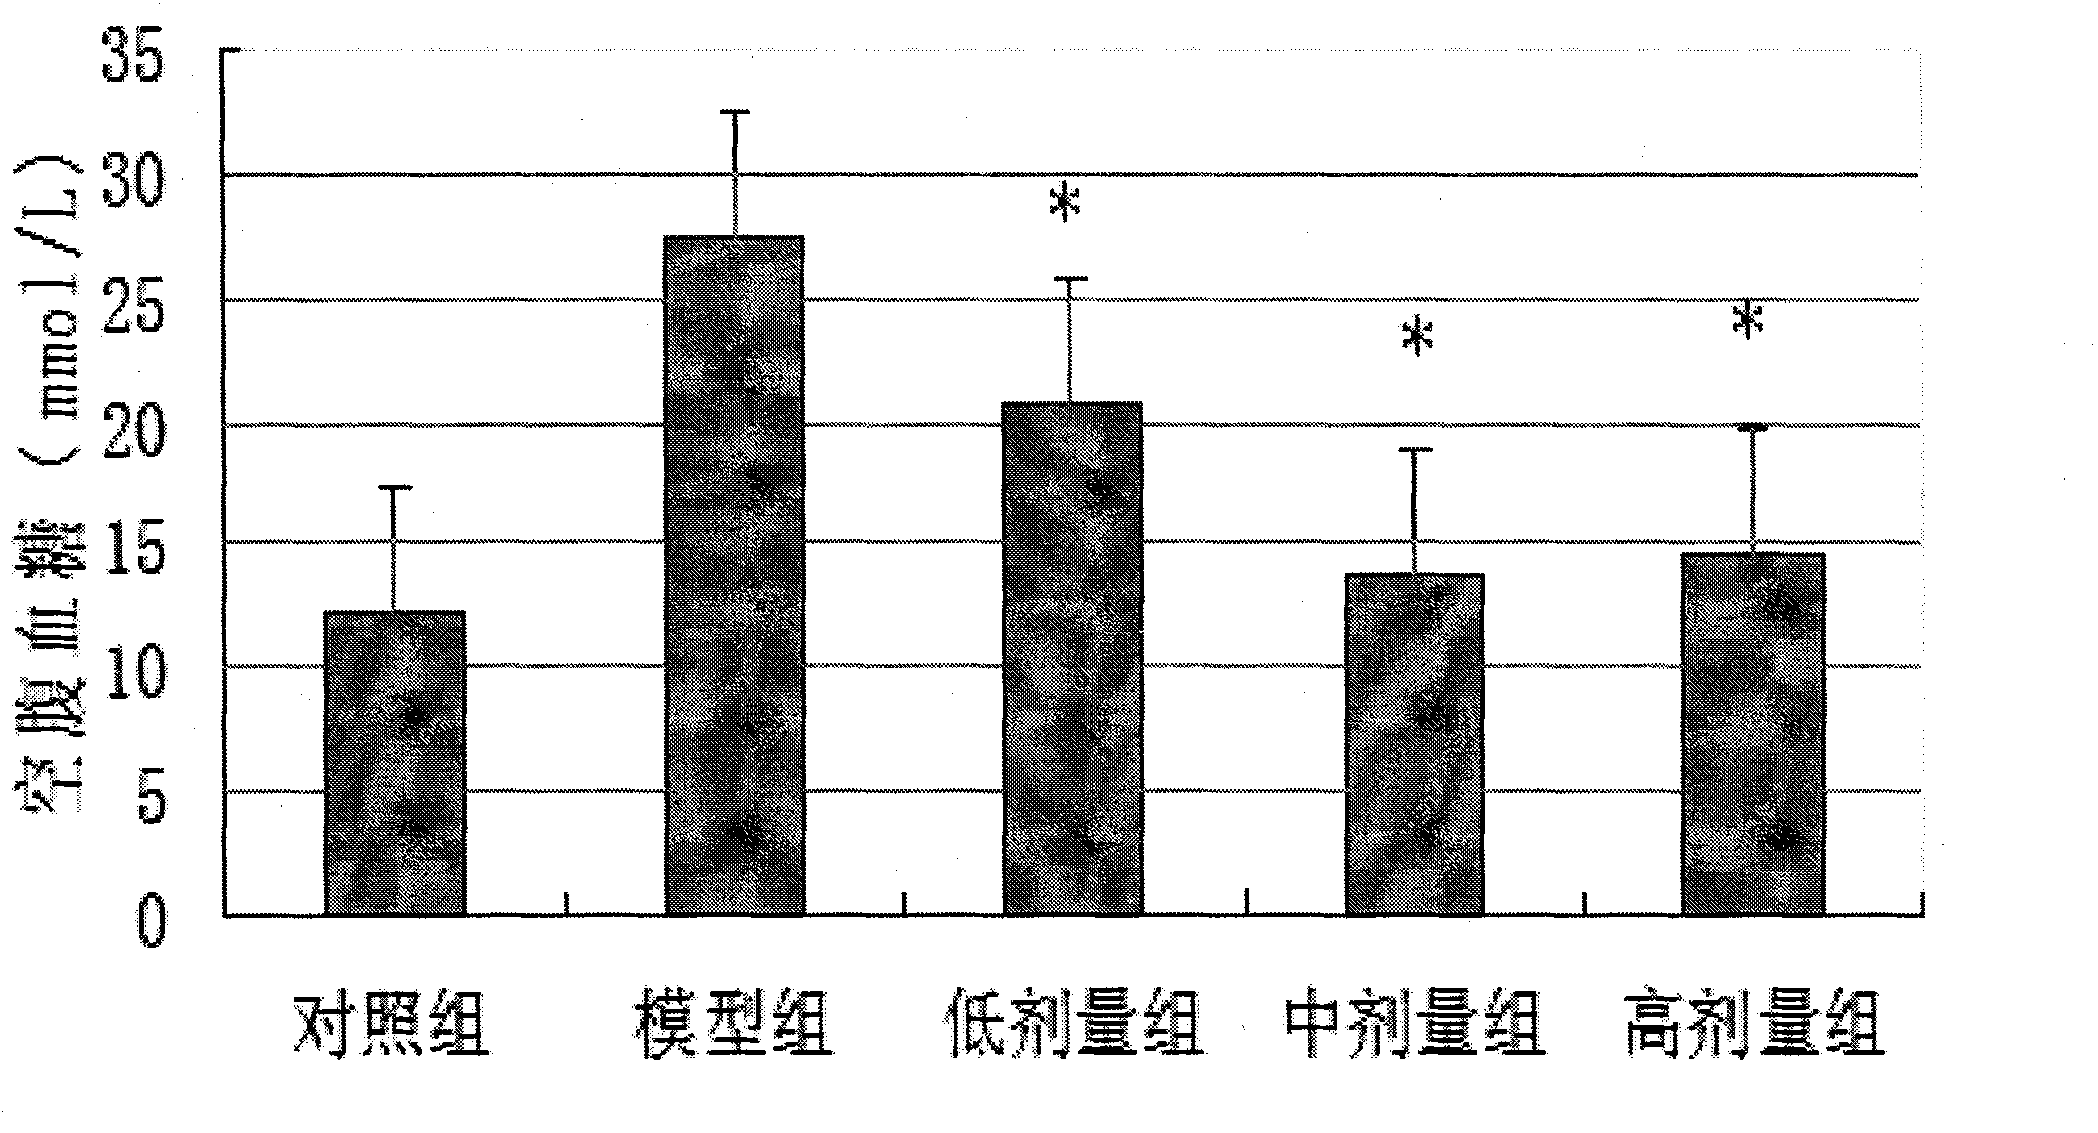 Composition containing curcumin and application of curcumin in preparing composition for adjusting blood sugar